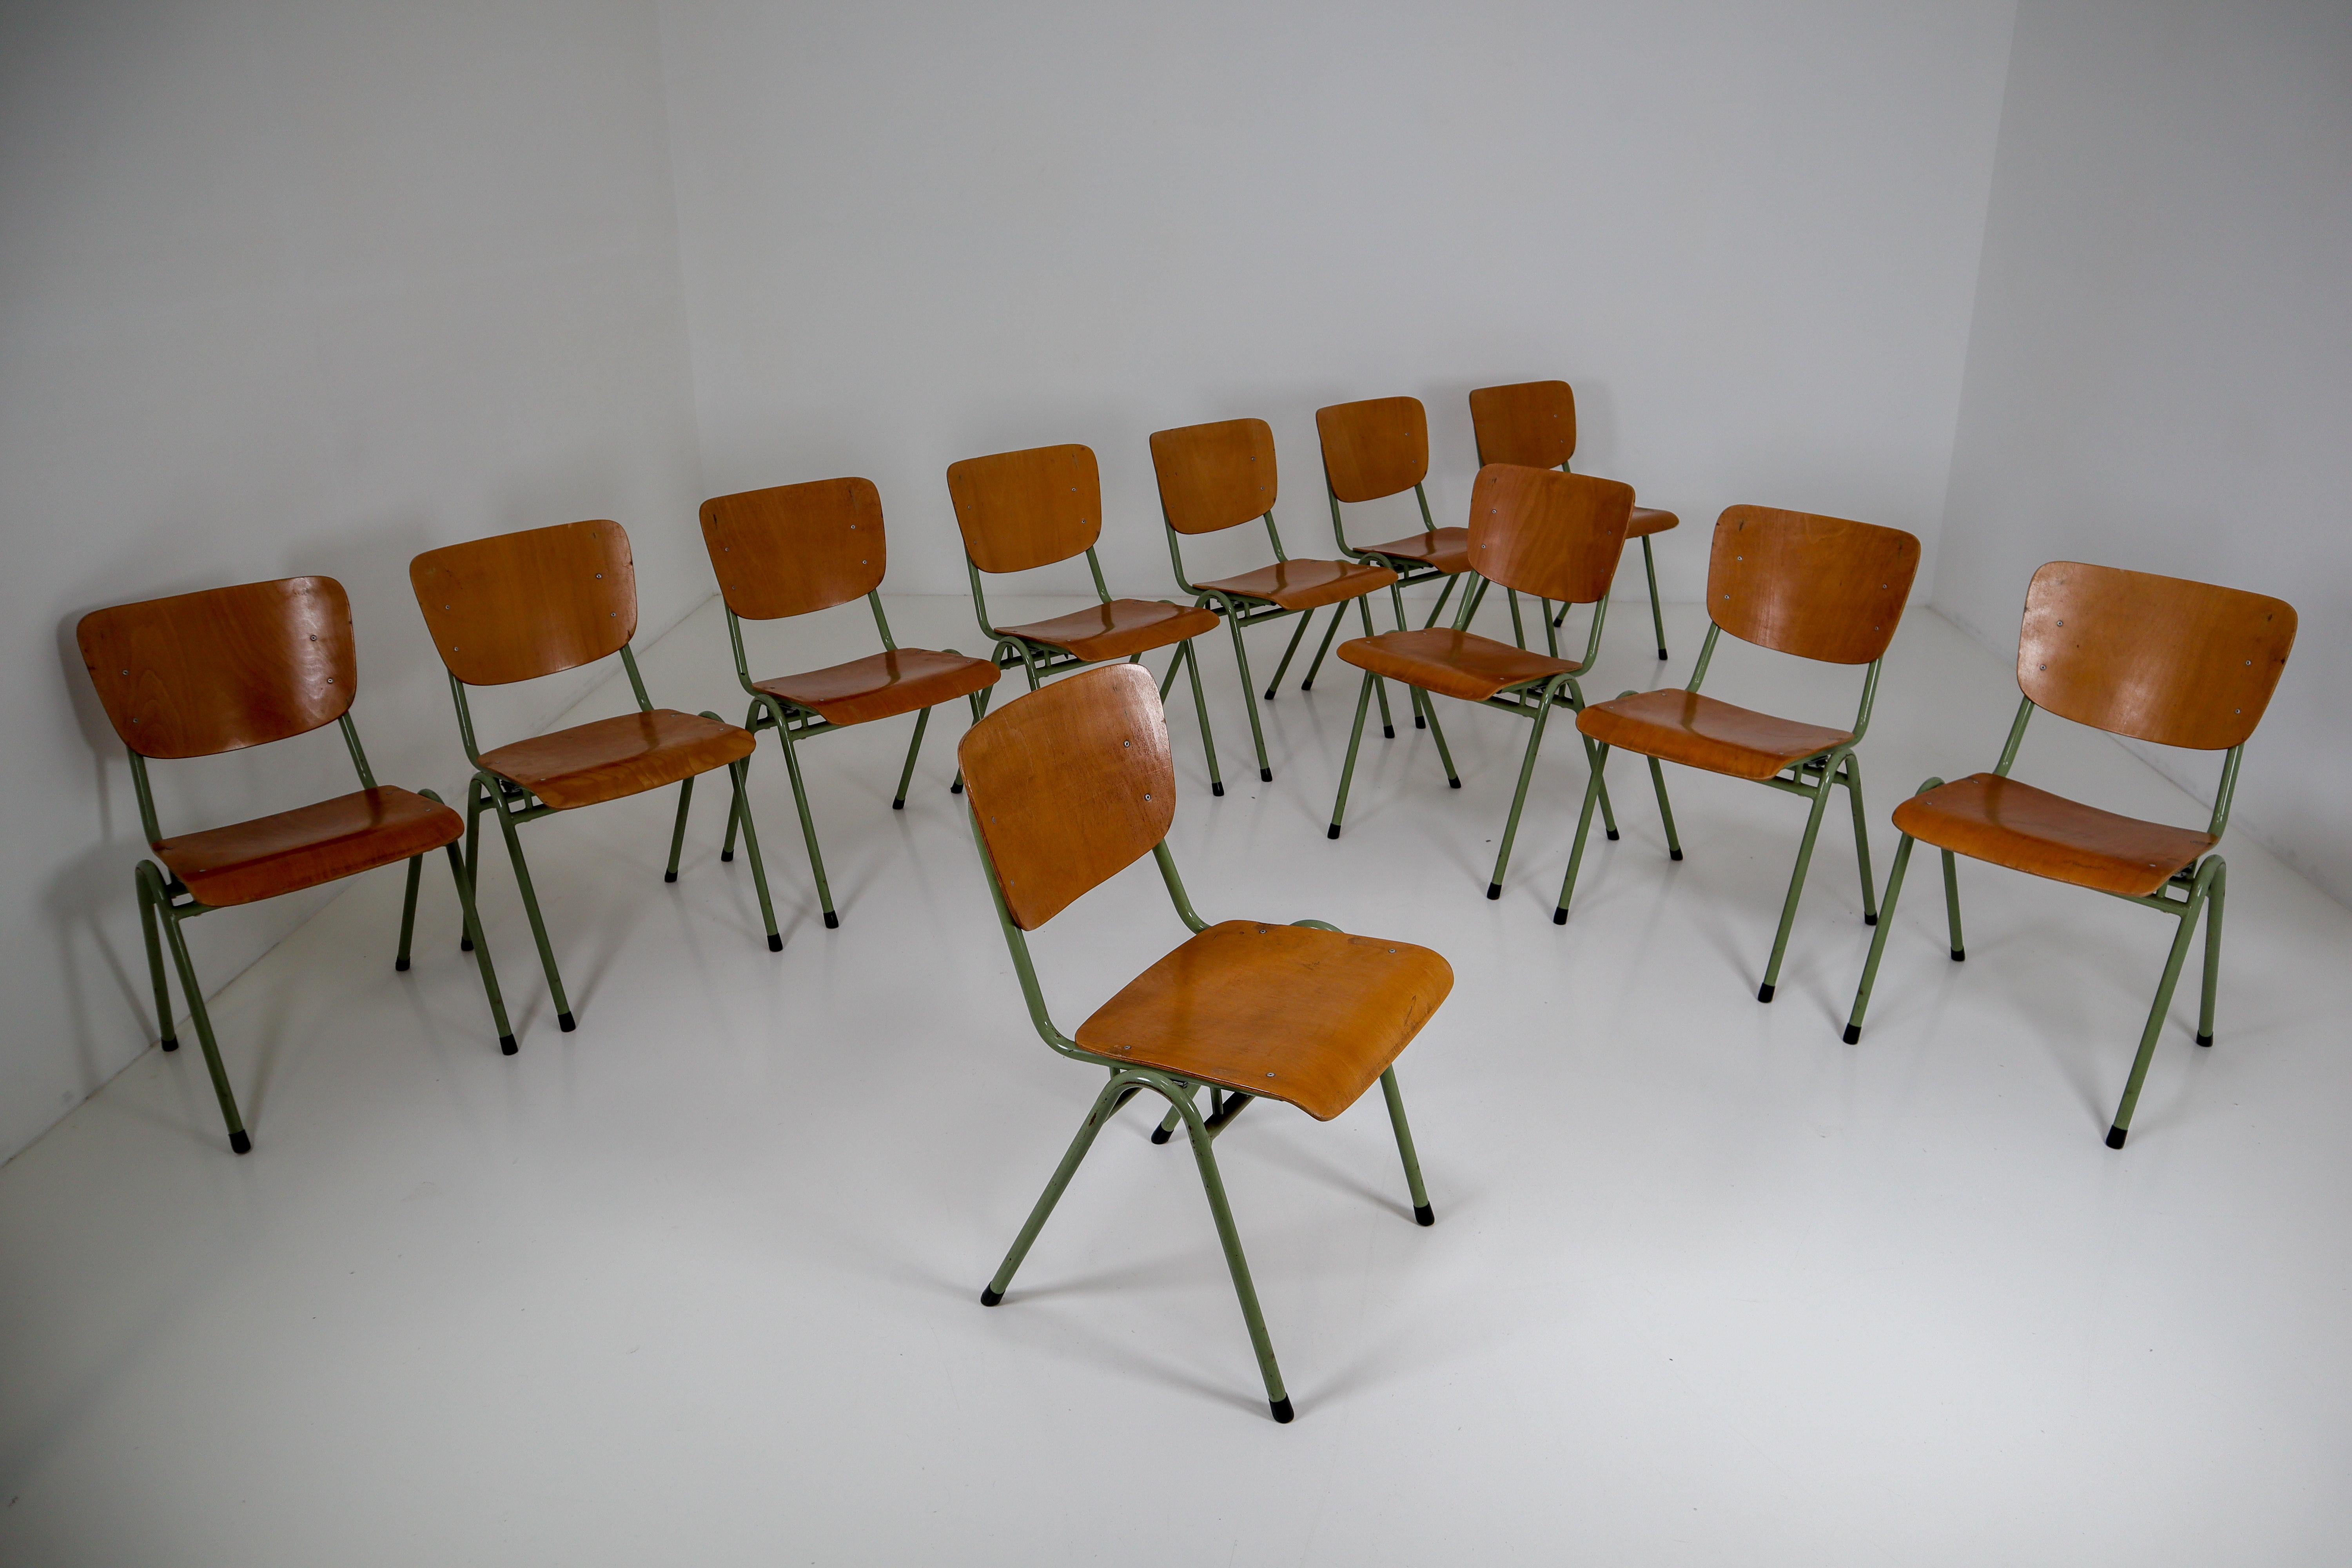 Crazy set of 100 x comfortable industrial plywood chairs, produced in Holland in the 1960s. These Dutch design chairs have a patinated green tubular metal frame and beautifully curved plywood seats. Minor wear consistent with age and use, very nice